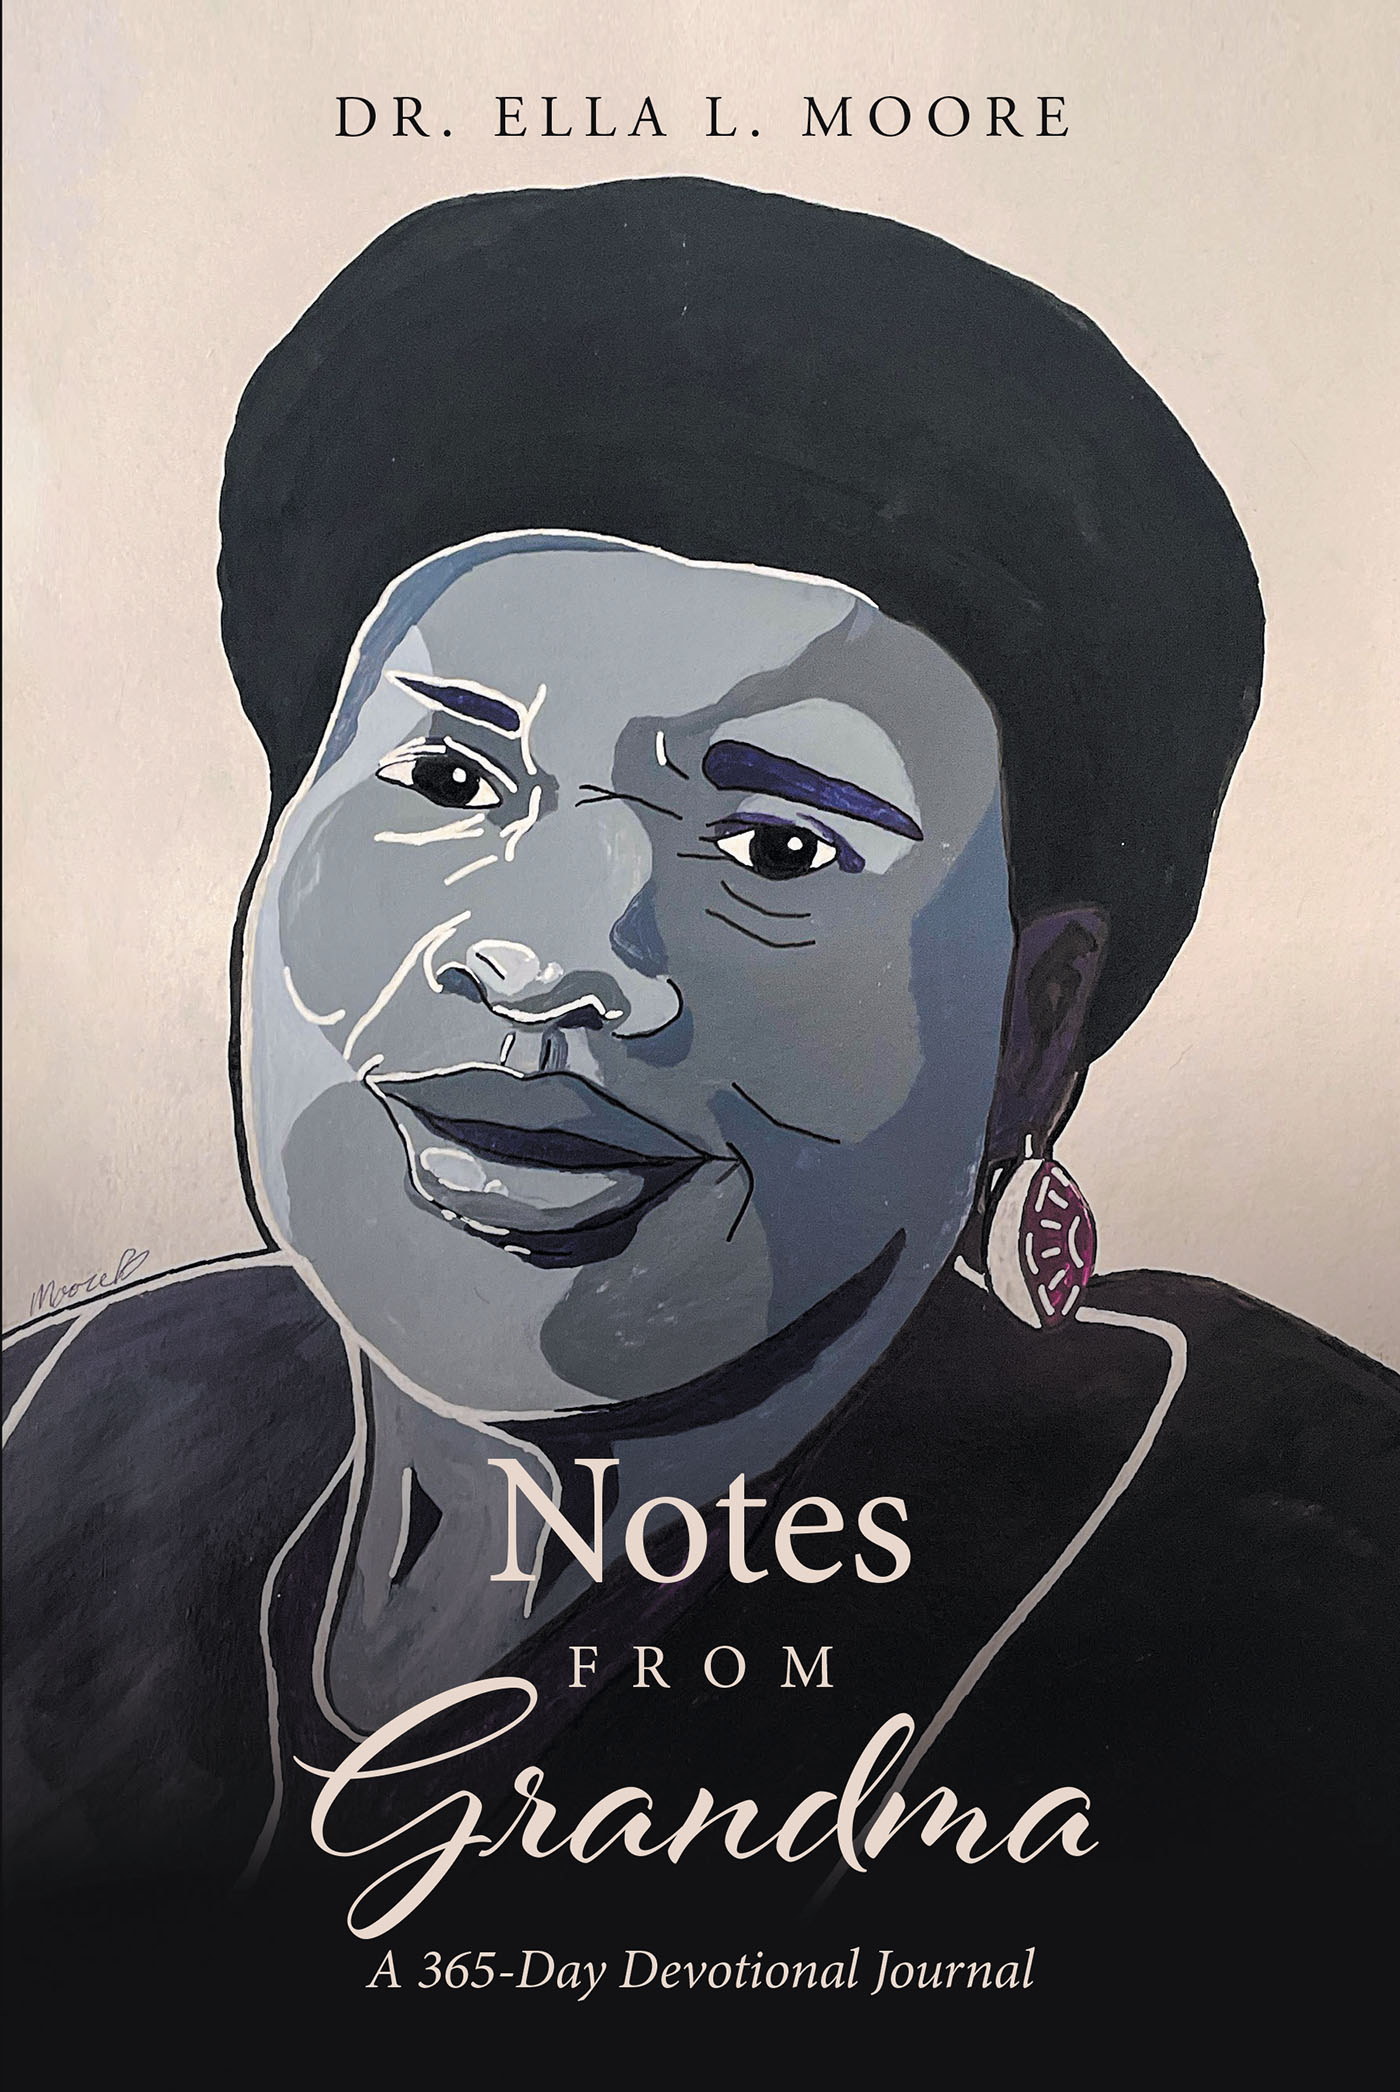 Dr. Ella L. Moore’s Newly Released "Notes From Grandma: A 365-Day Devotional Journal" is an Empowering Devotional Experience